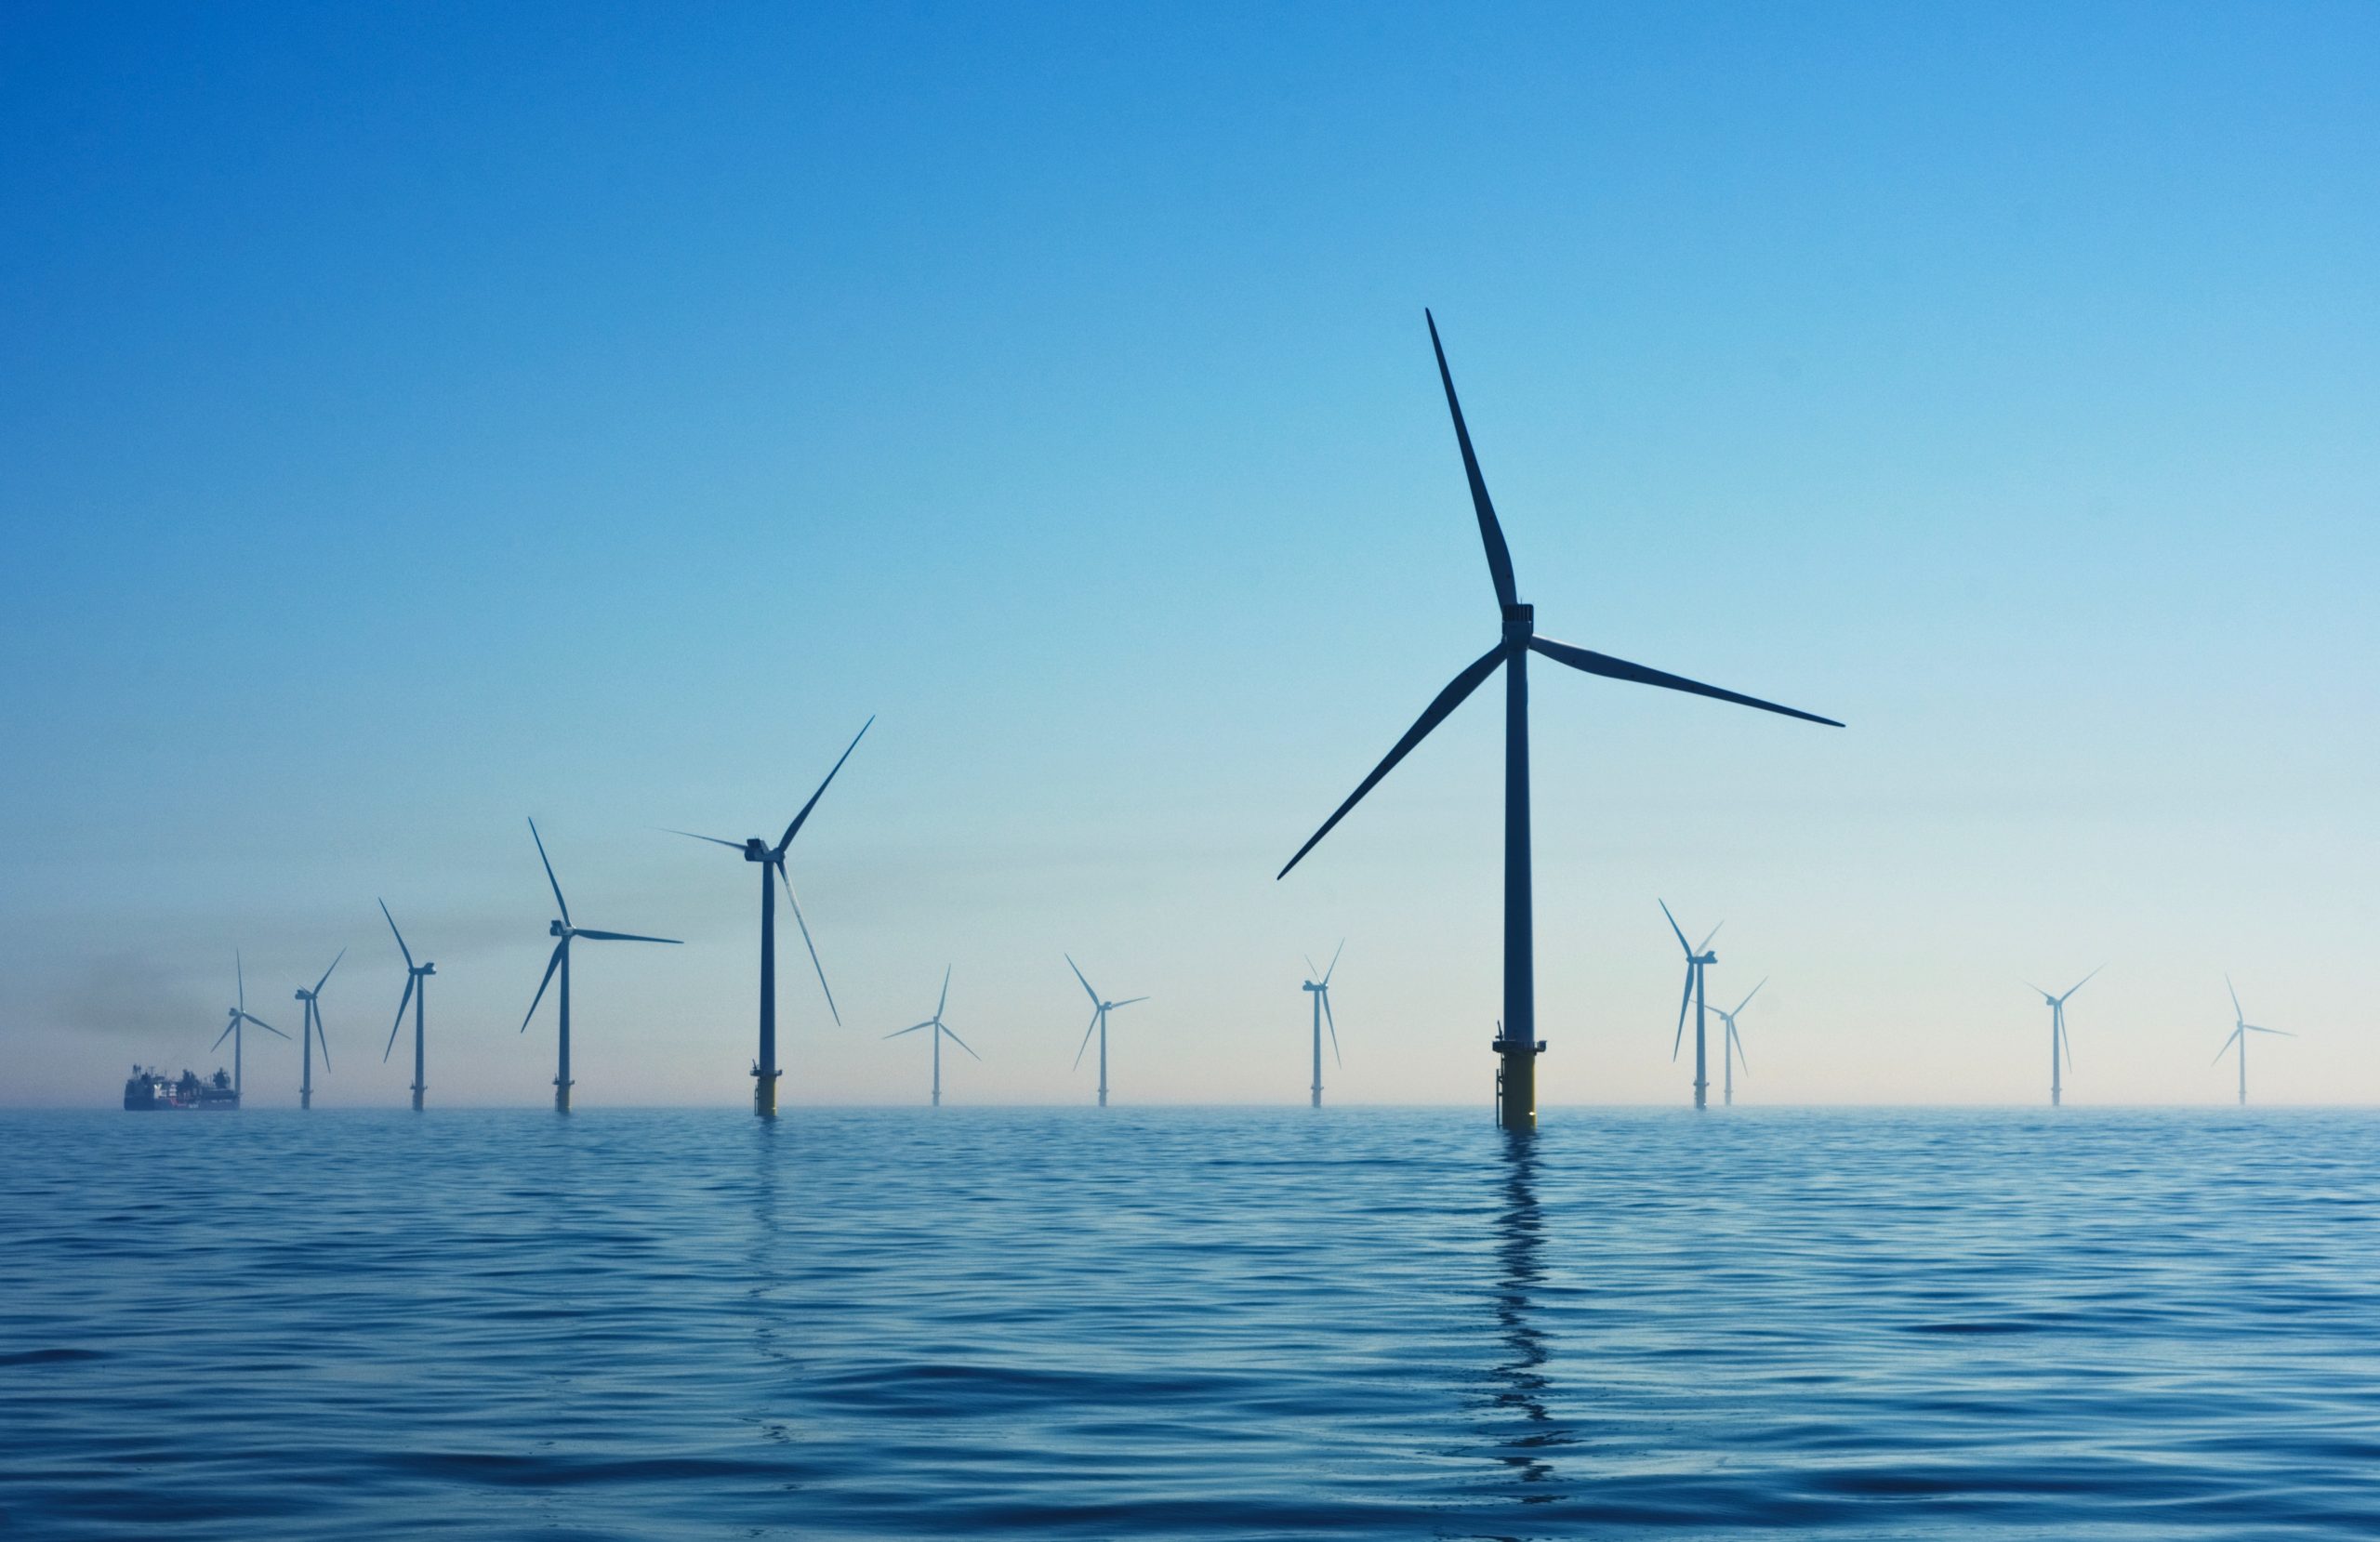 Offshore wind farm, wind turbines out at sea